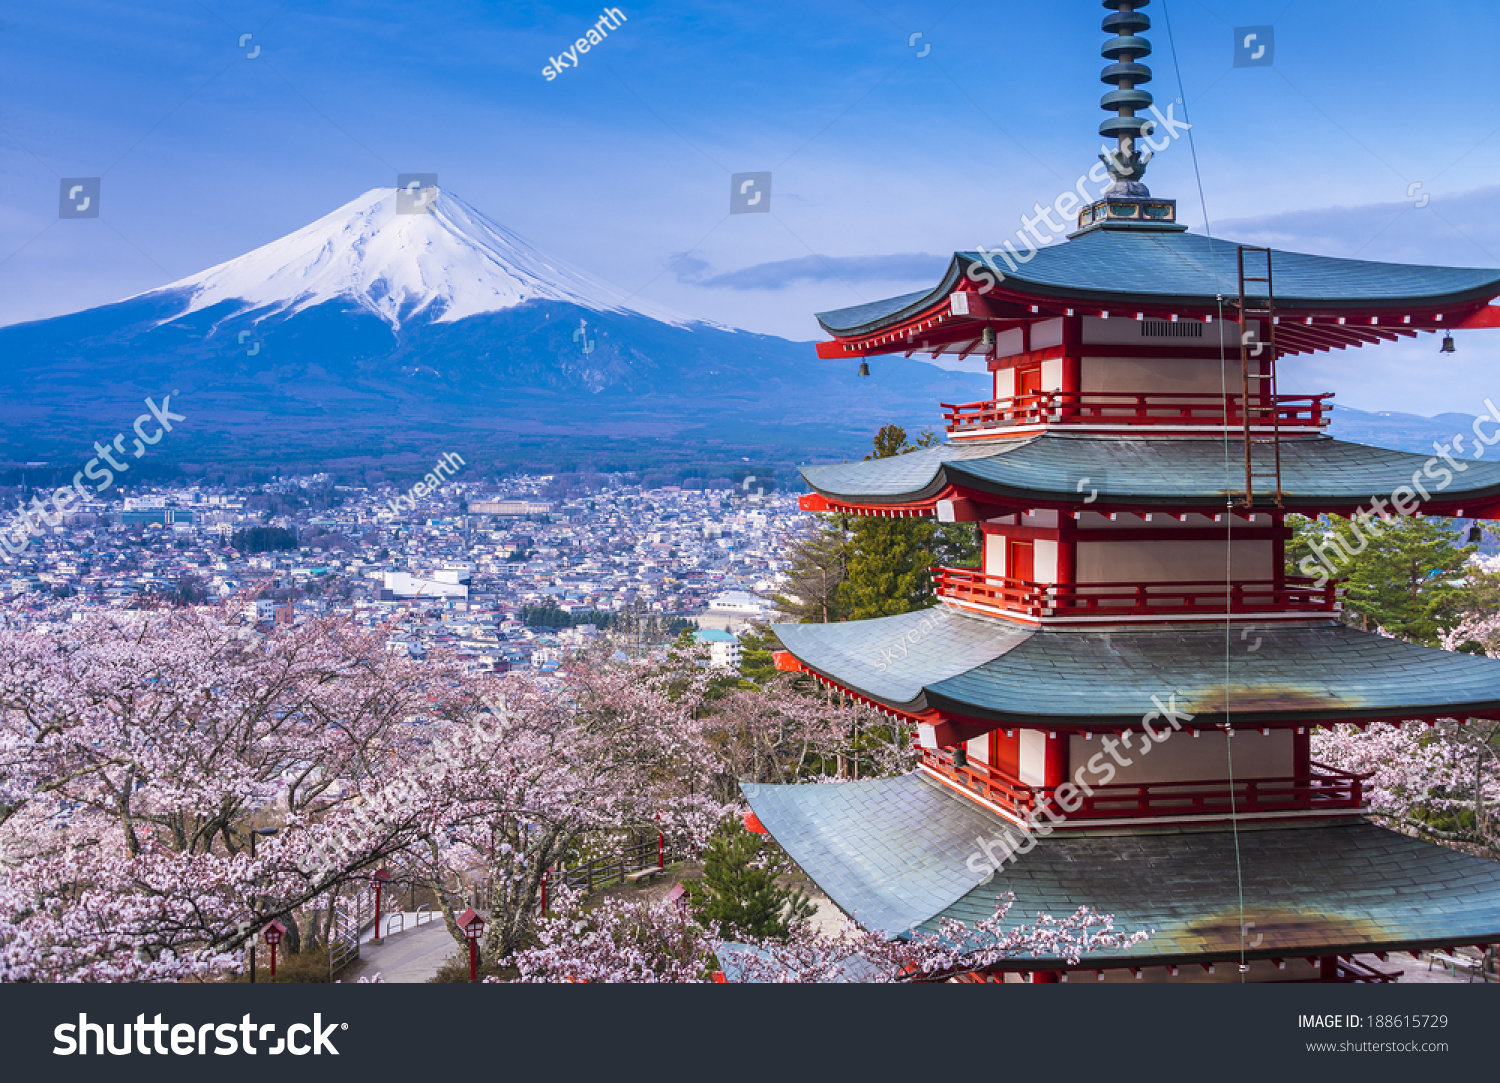 Red Pagoda with Mt Fuji on the background  #188615729